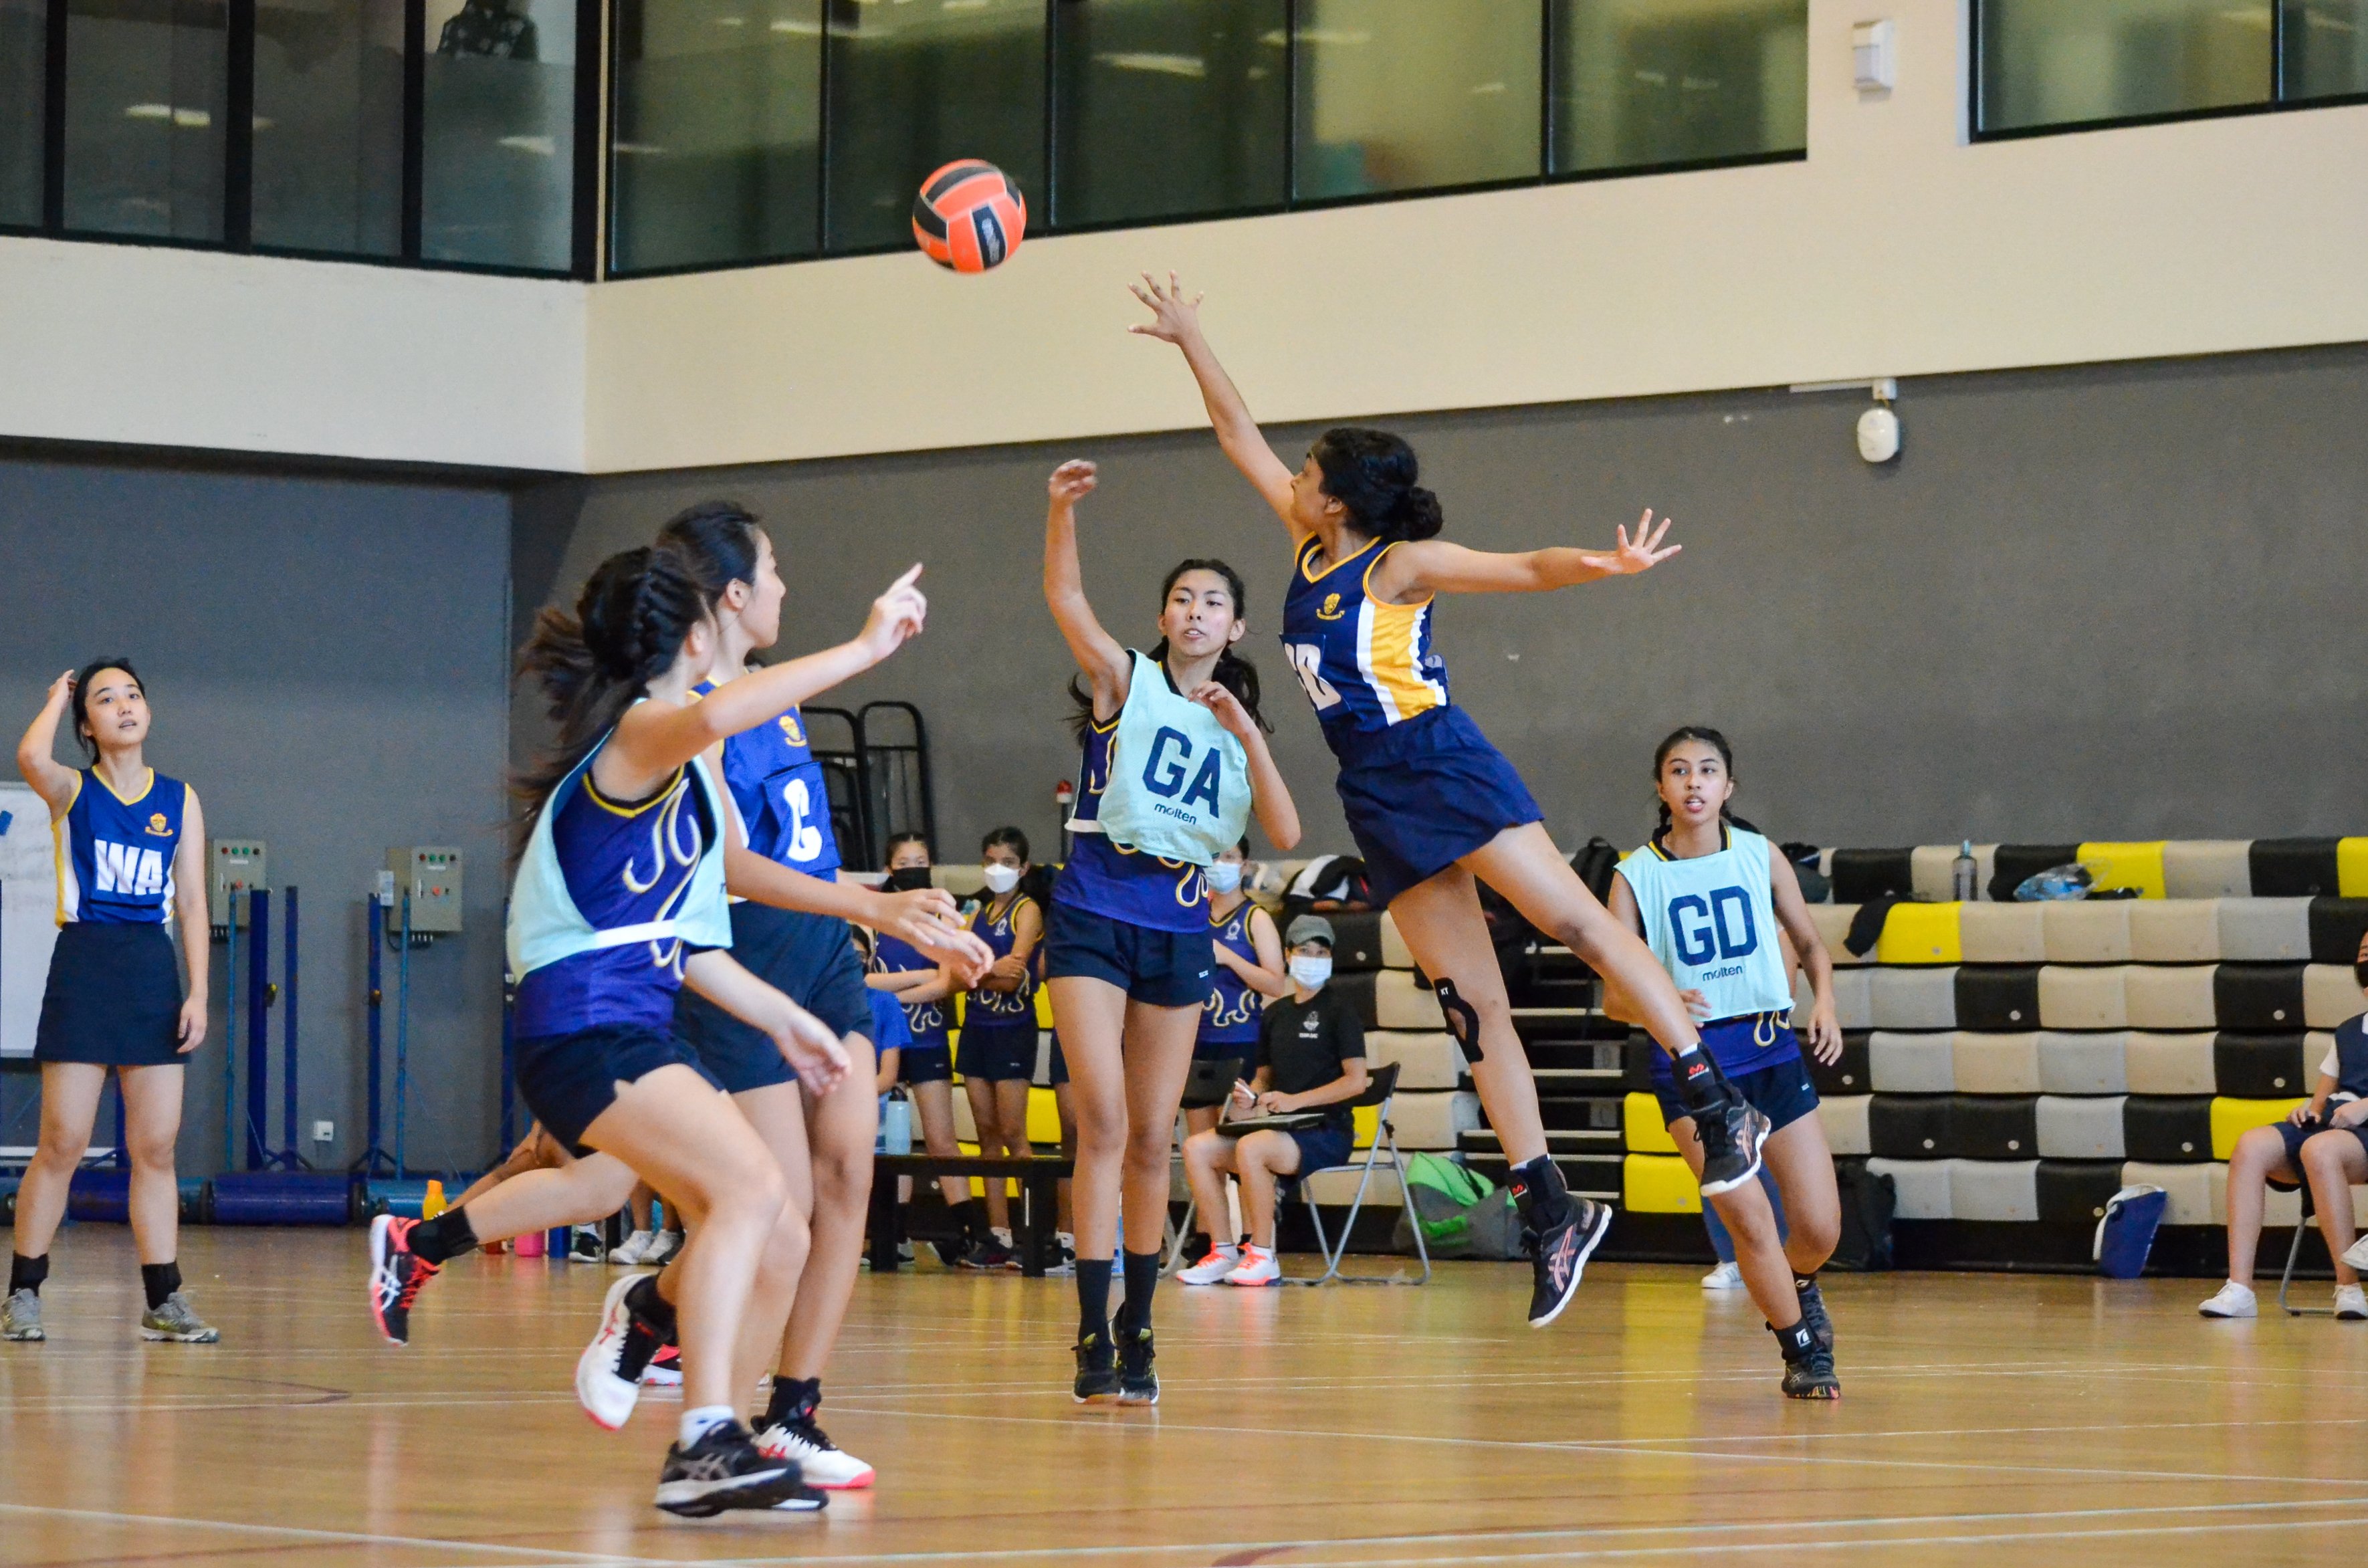 Sch-East-B Div Netball TNVictorNg-MGS_Nashita-out-jumping the rest-NB42